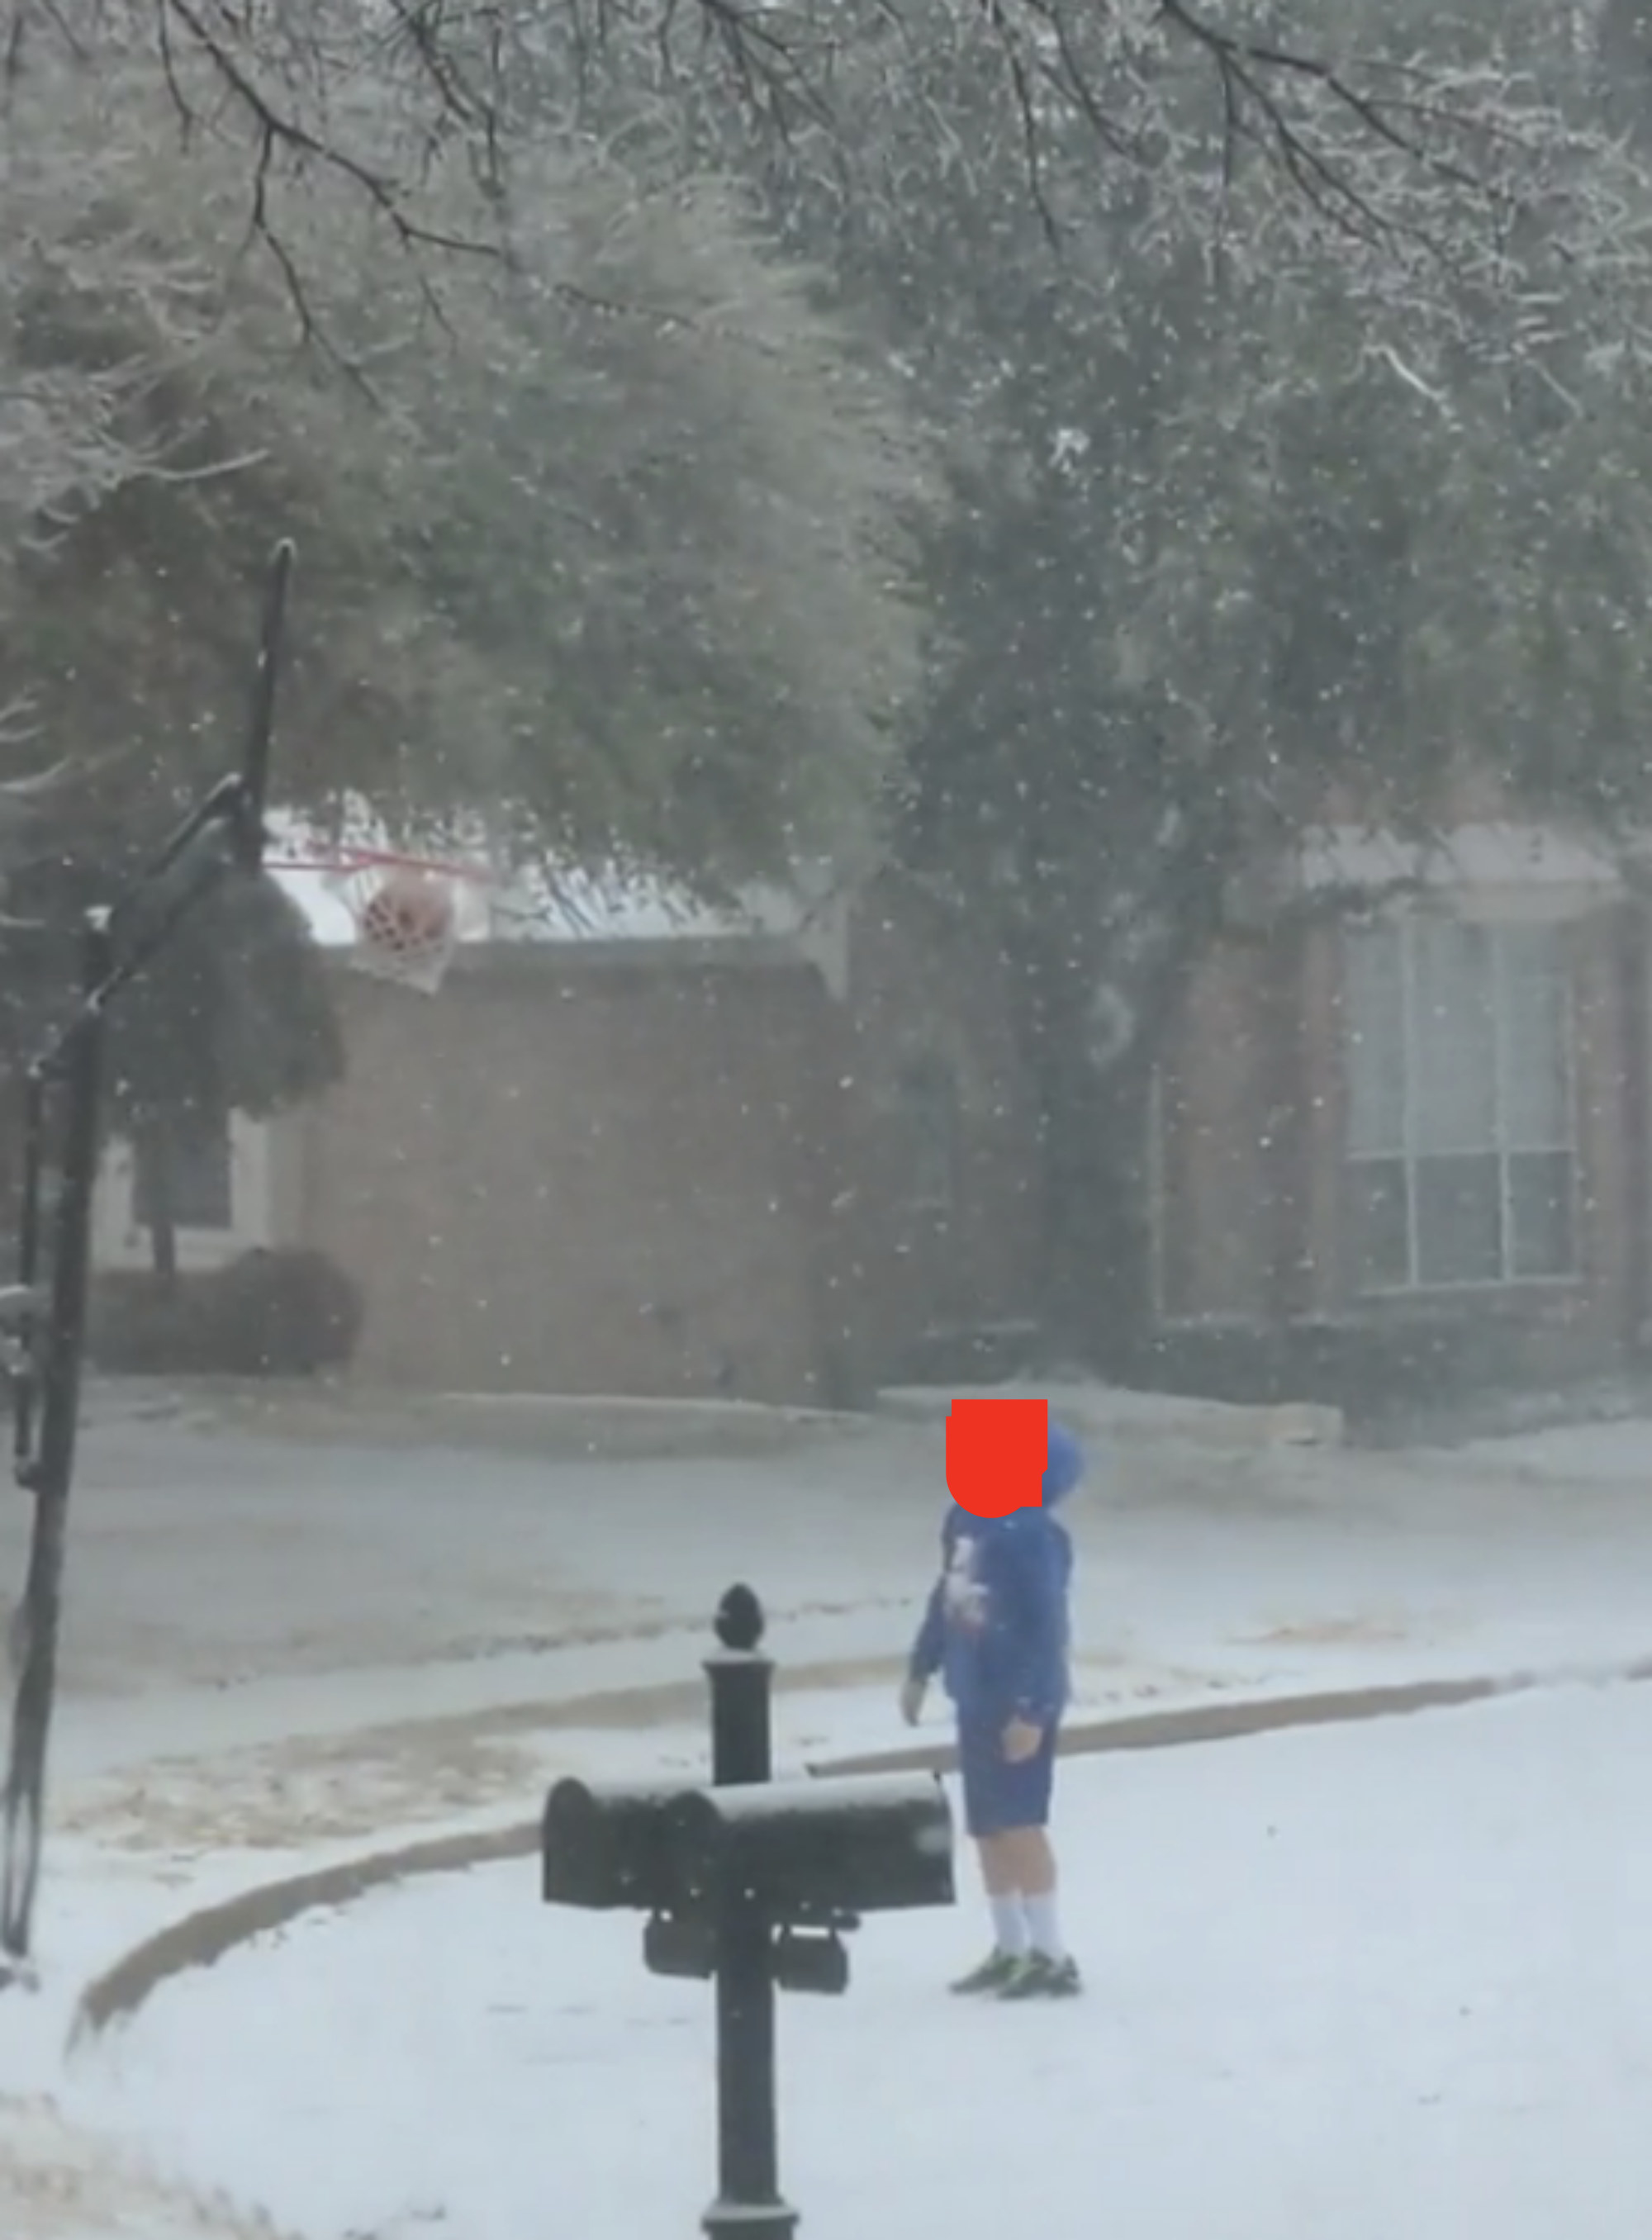 Kid looking up at a basketball stuck in a hoop on a snowy street